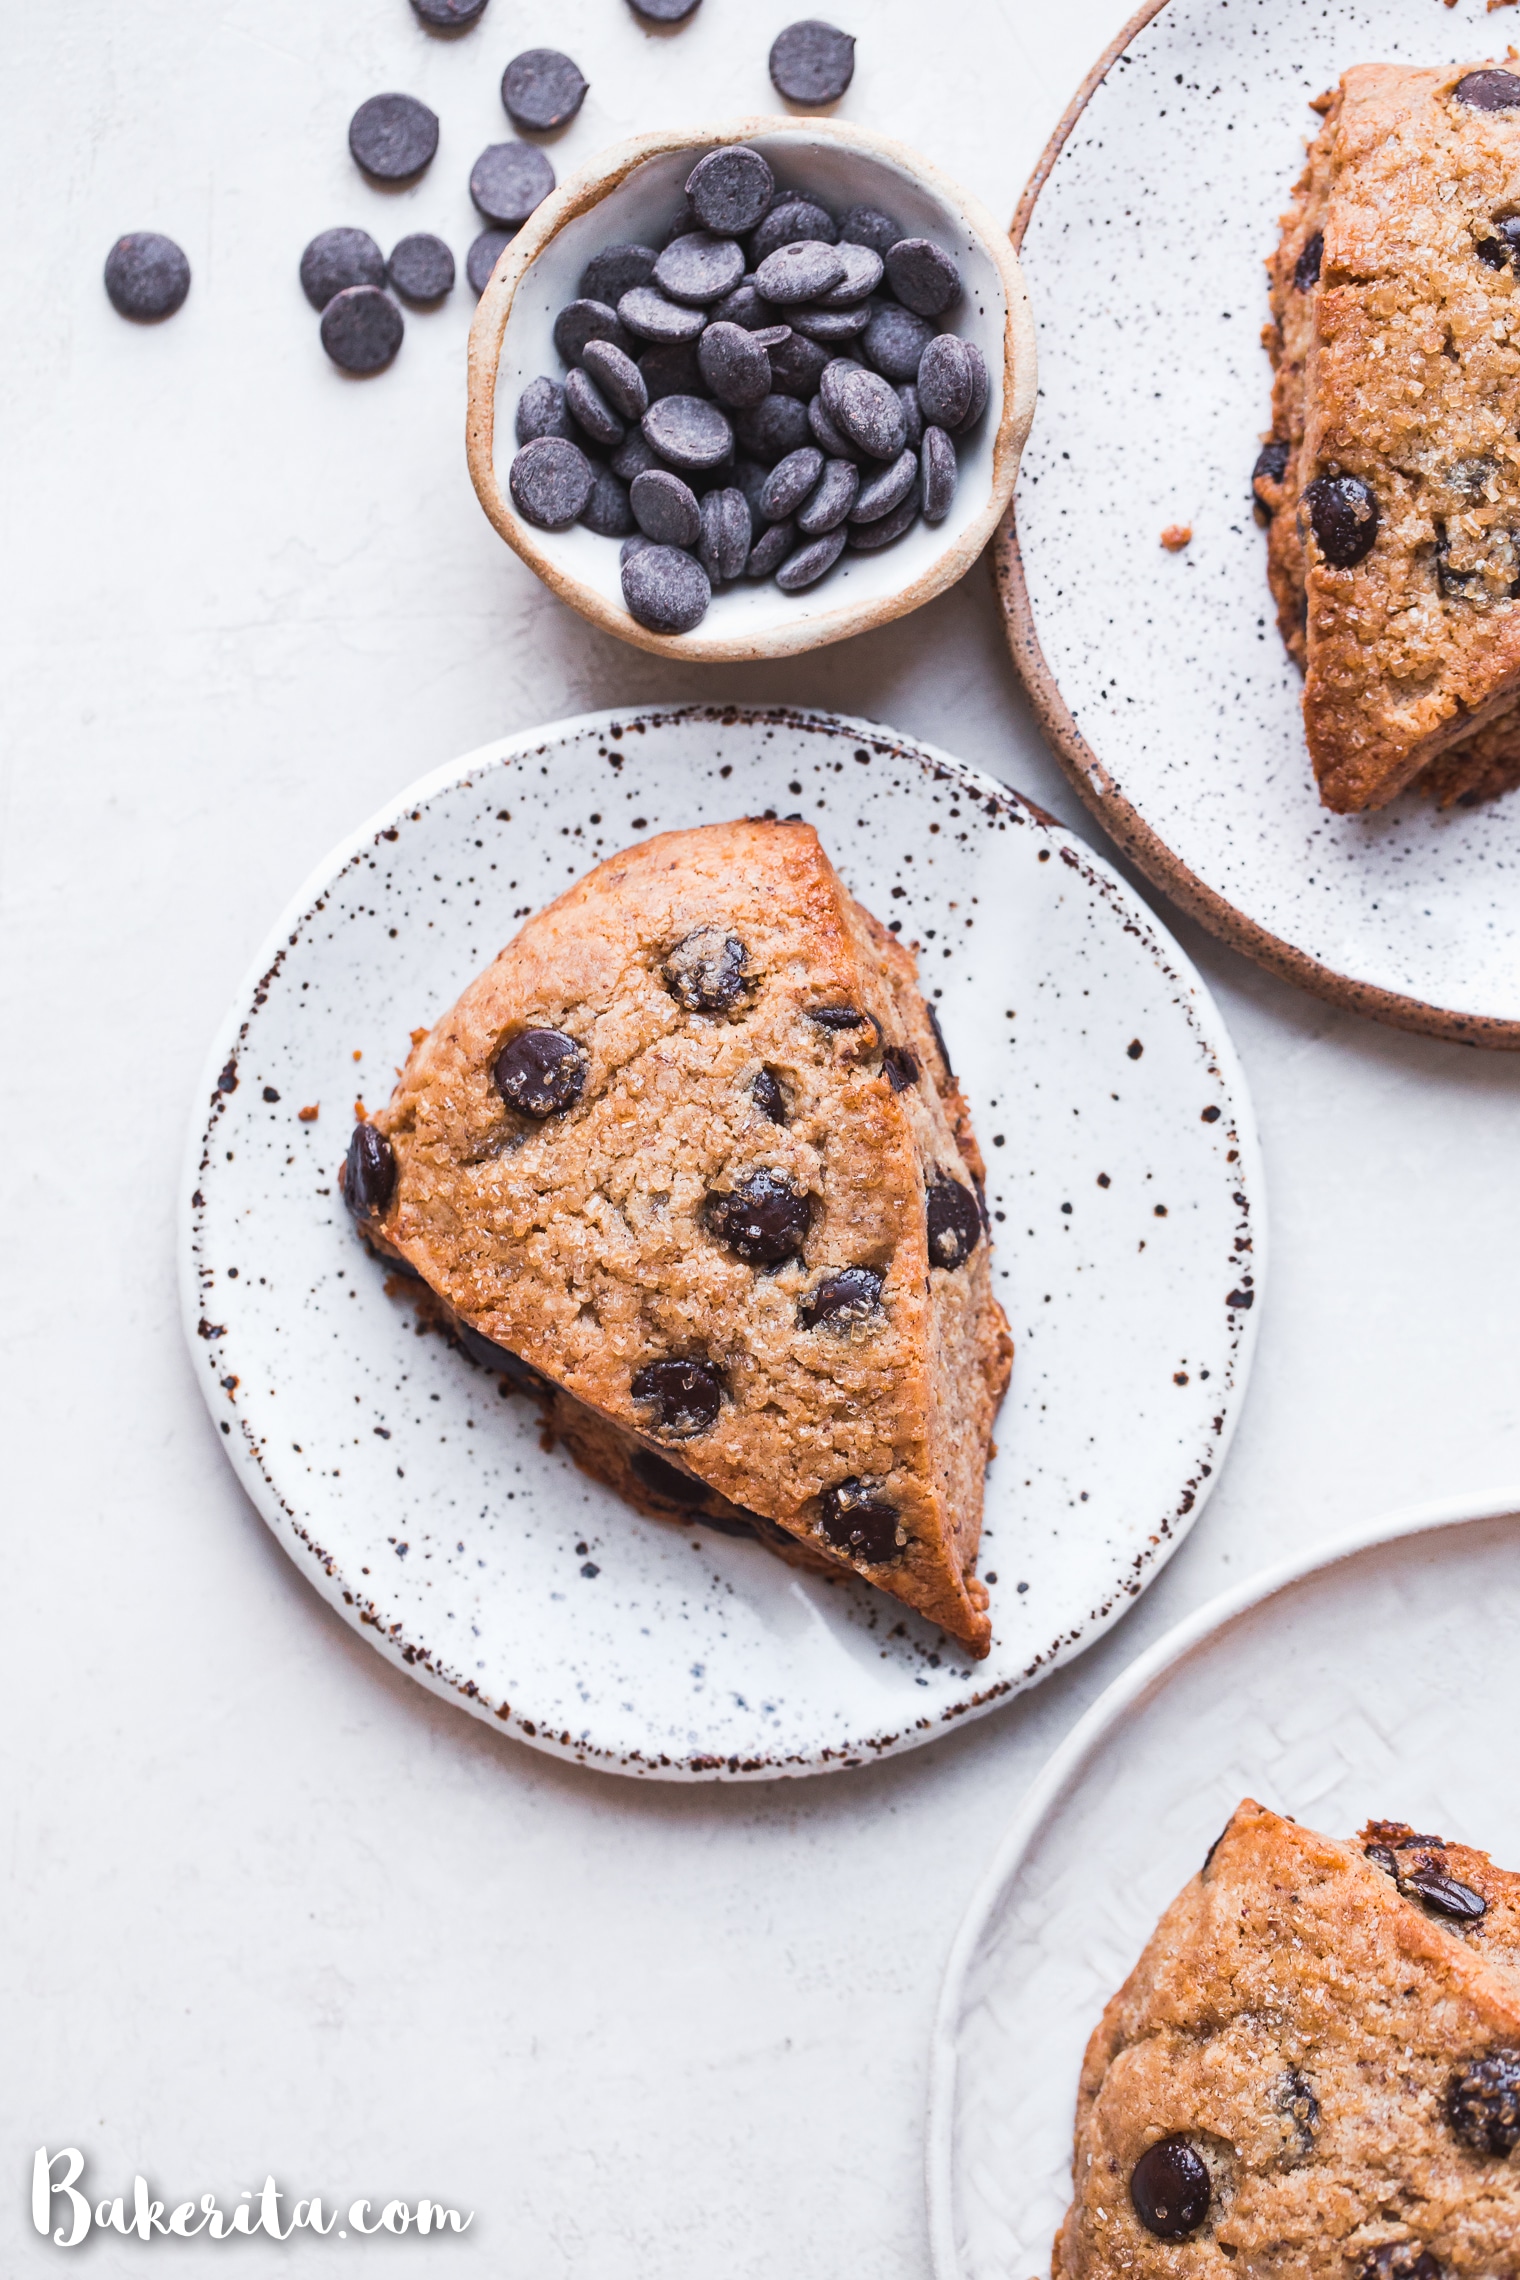 These Vegan Gluten-Free Chocolate Chip Scones are everything a good scone should be: tender and fluffy on the inside, with a crispy, slightly crumbly exterior. These paleo scones are loaded with chocolate chips and make for a delicious breakfast, snack, or dessert.